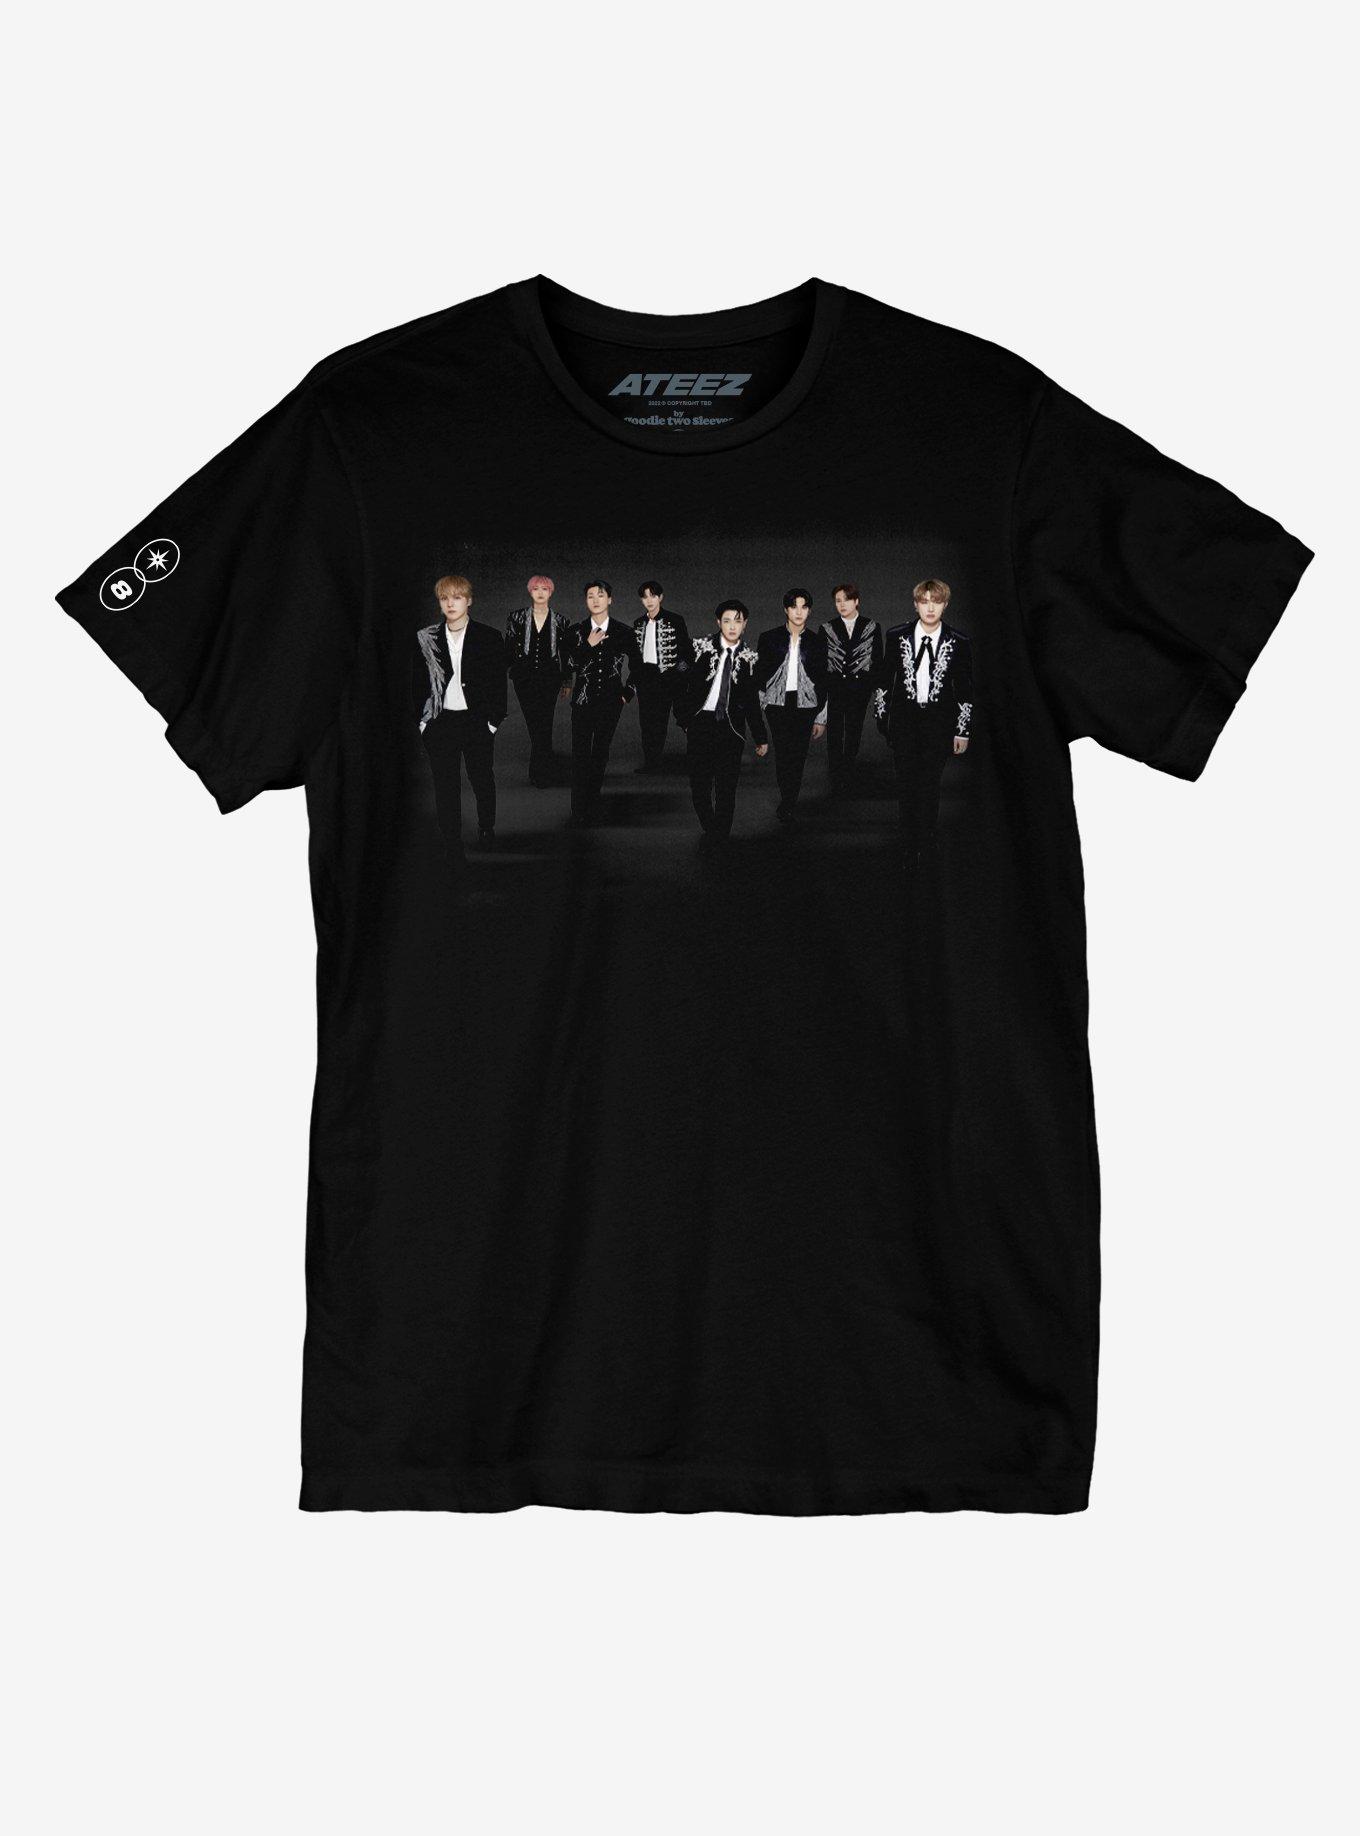 Say aside confirm Authentication ATEEZ Fellowship T-Shirt | Hot Topic